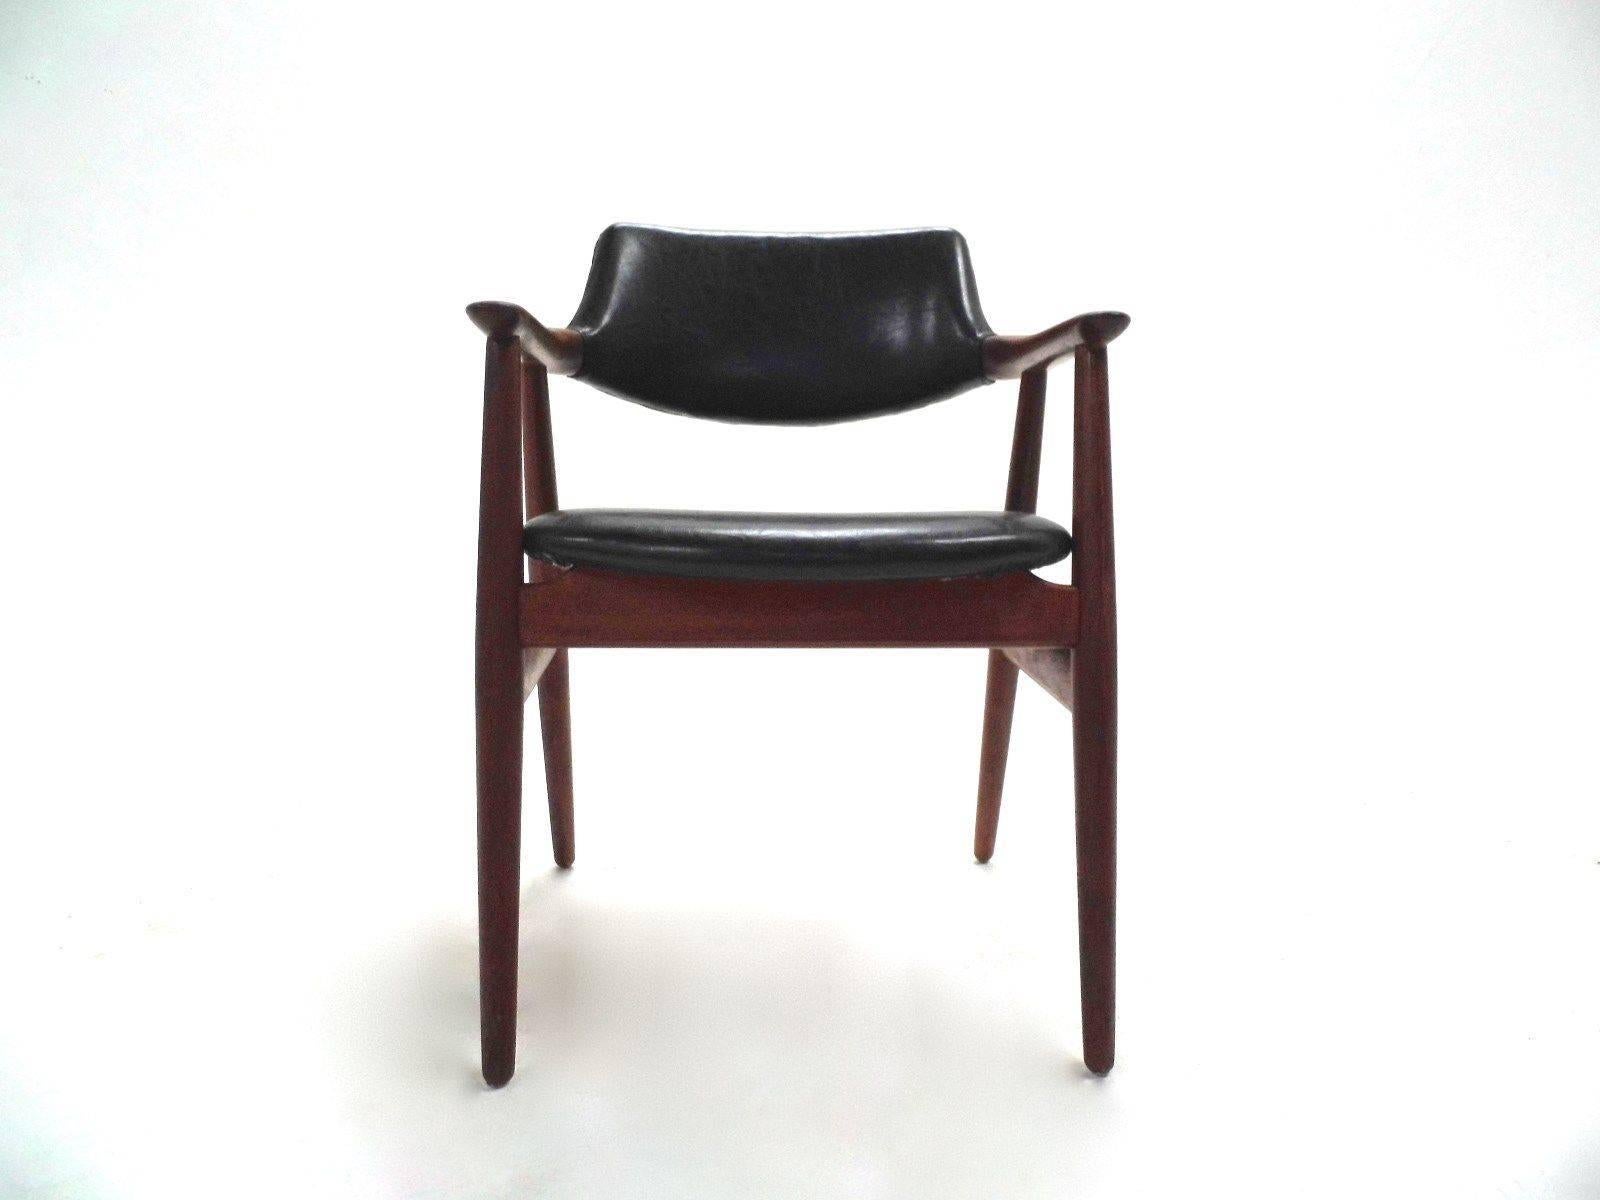 A beautiful Danish Model GM11 teak and black vinyl desk chair designed by Svend Age Eriksen for Glostrup Mobelfabrik in the 1960s, this would make a stylish addition to any living or work area. The chair has a curved backrest and sculptured teak